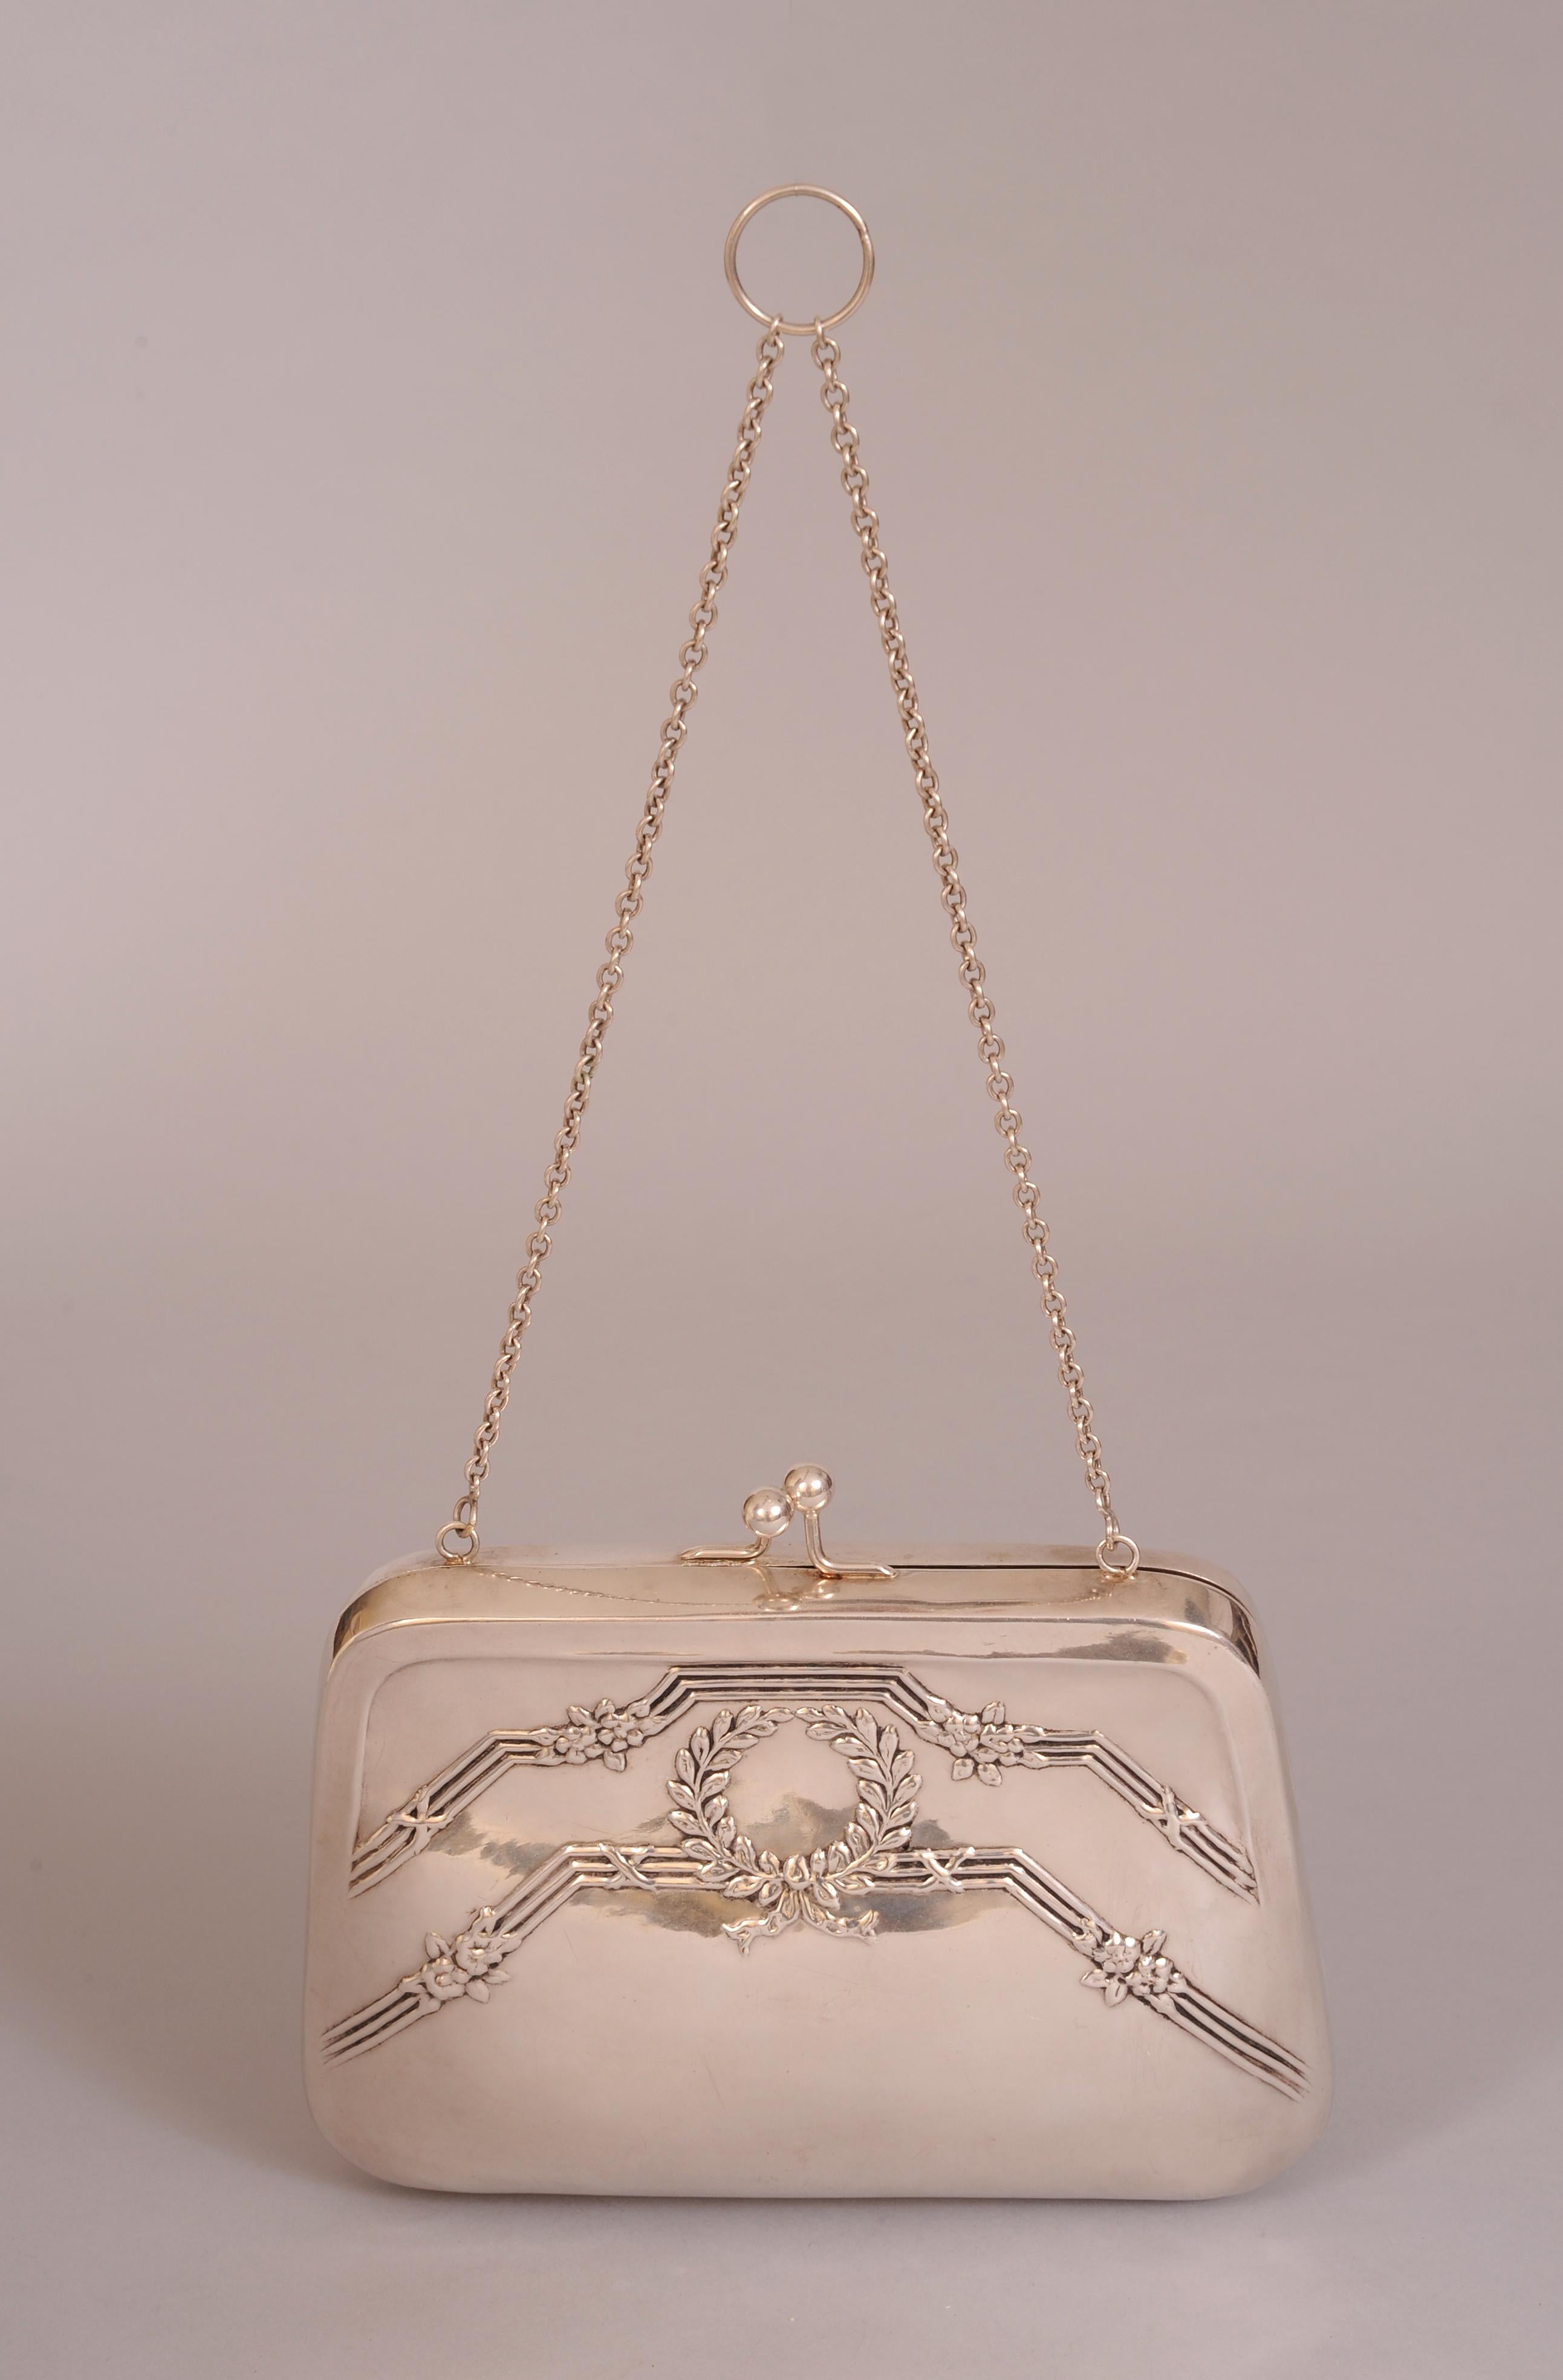 This roomy silver bag from Roberta di Camerino is large enough to hold a phone and all of the rest  of your necessities for an evening on the town.  It has a kiss lock closure, a chain strap and a burgundy satin interior with a slip pocket. Both